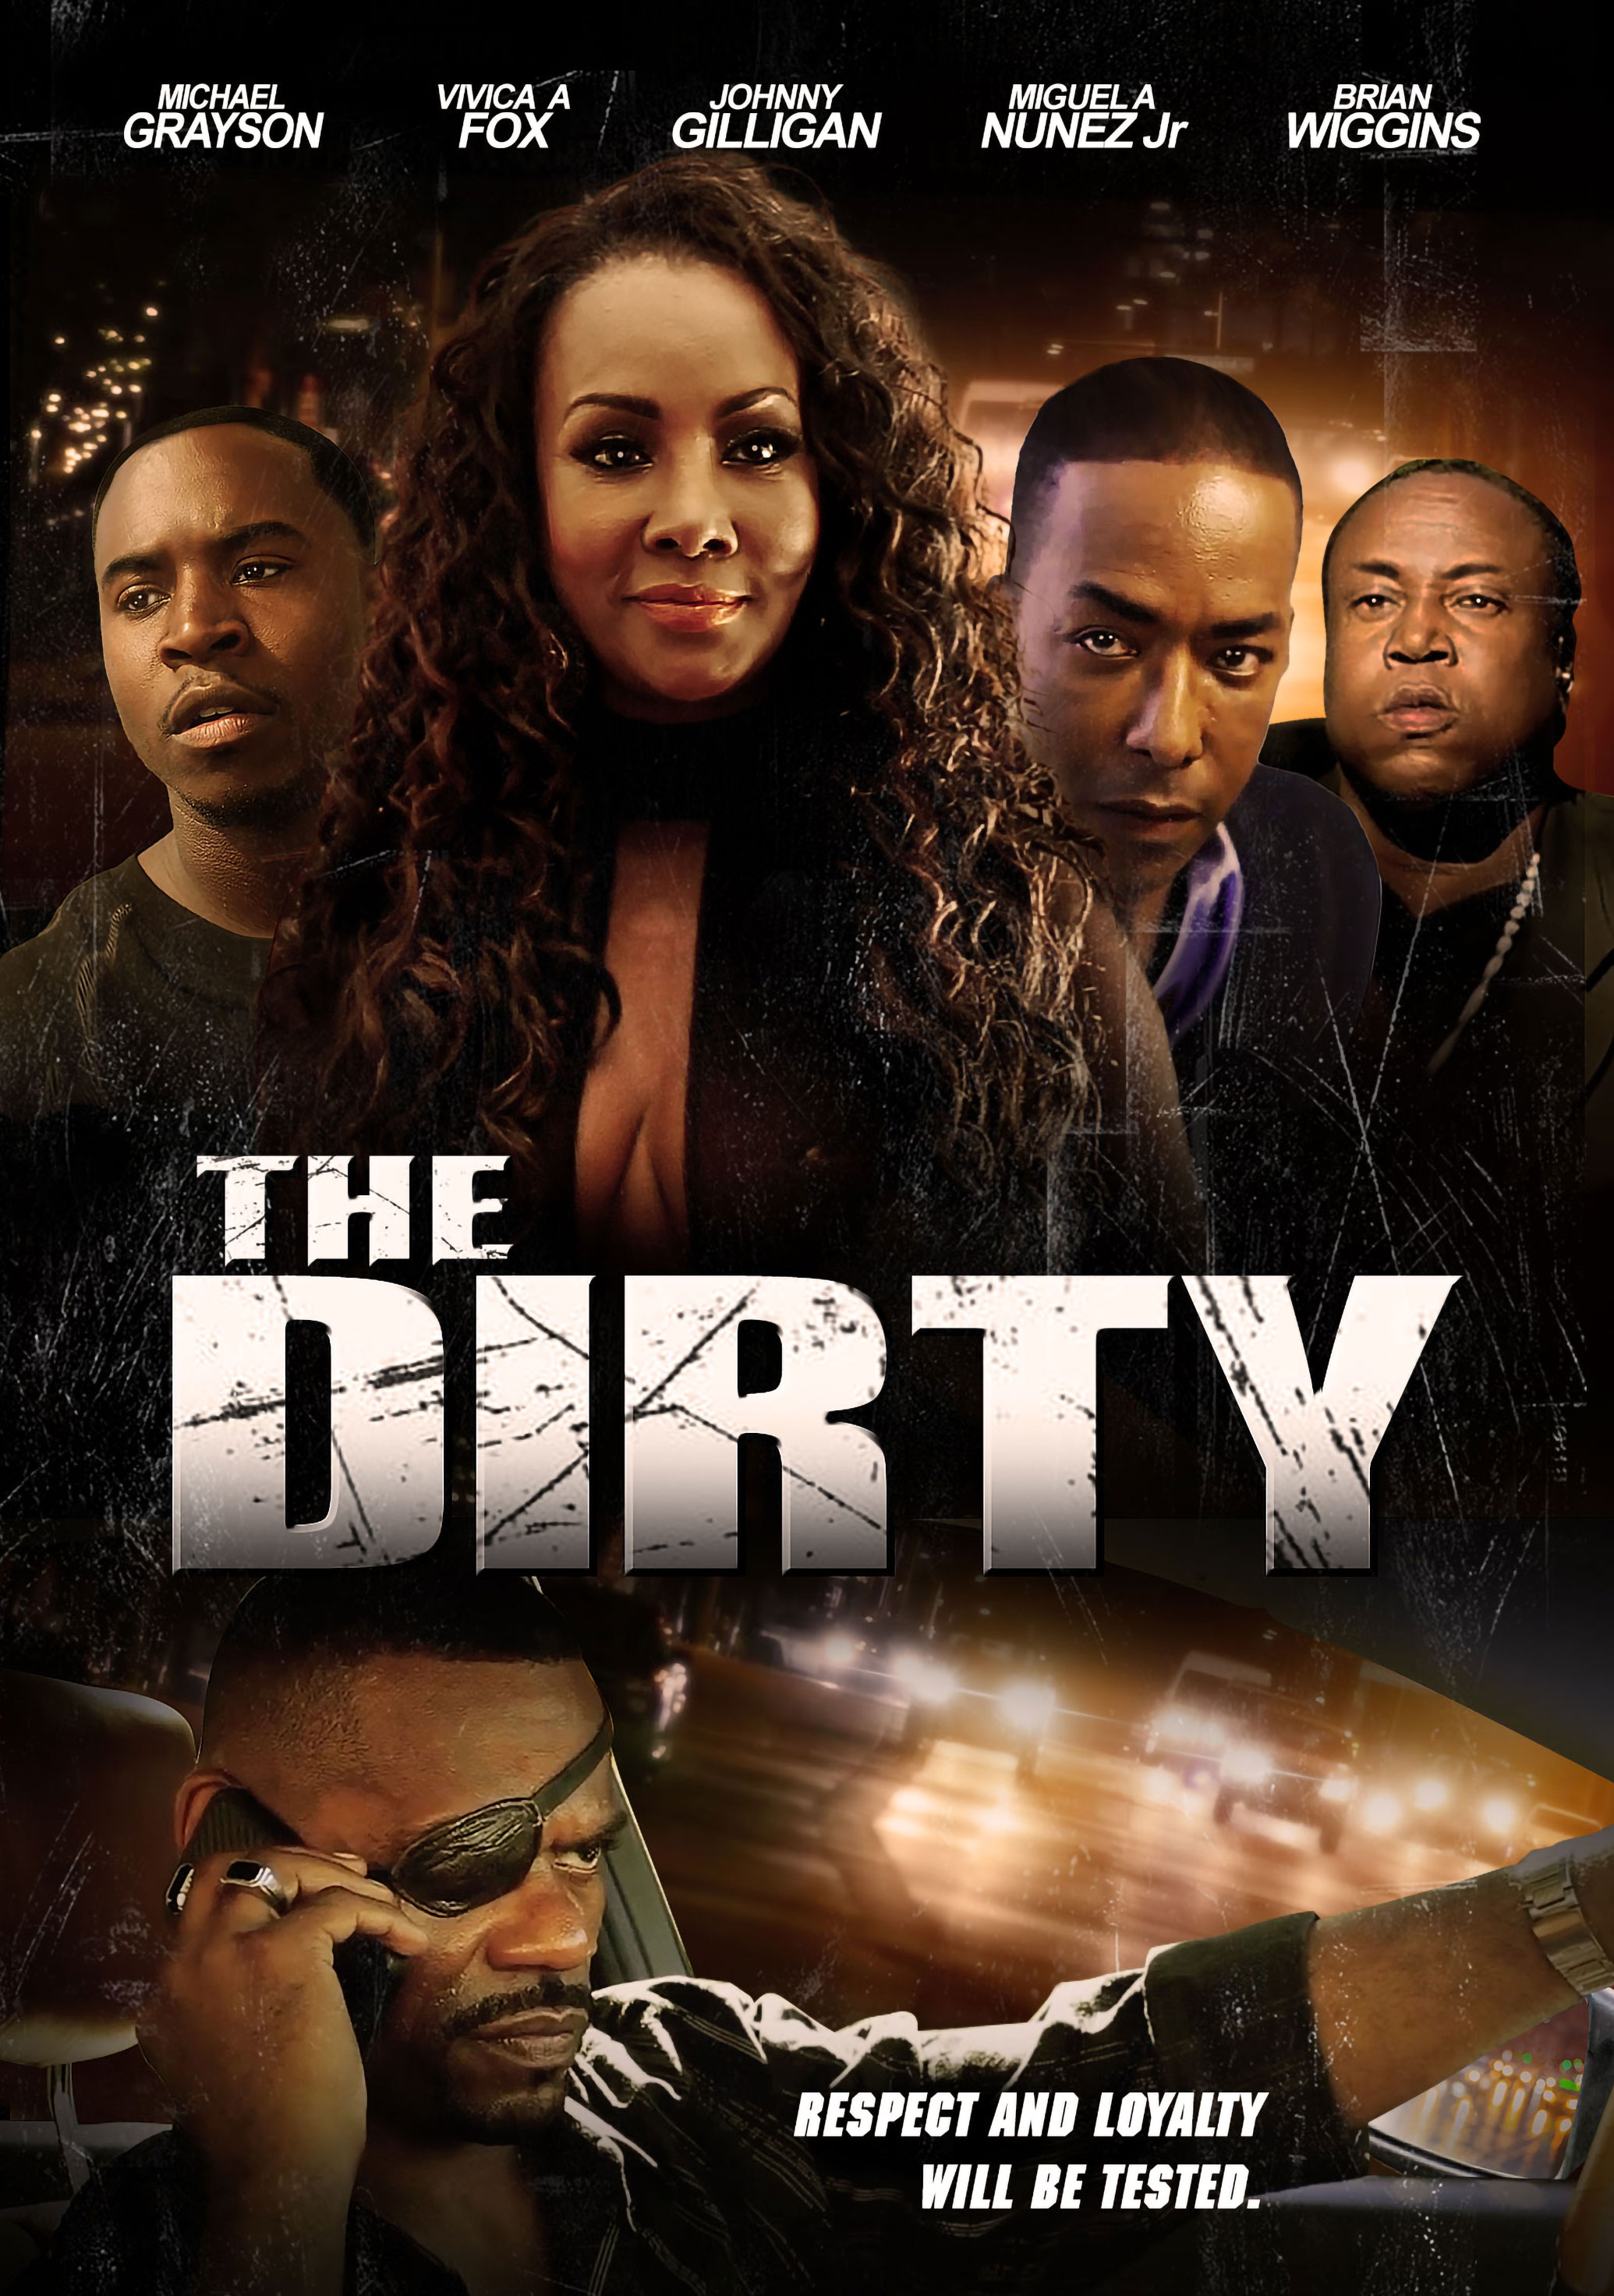 The Dirty (2013) Crime, Directed By M pic